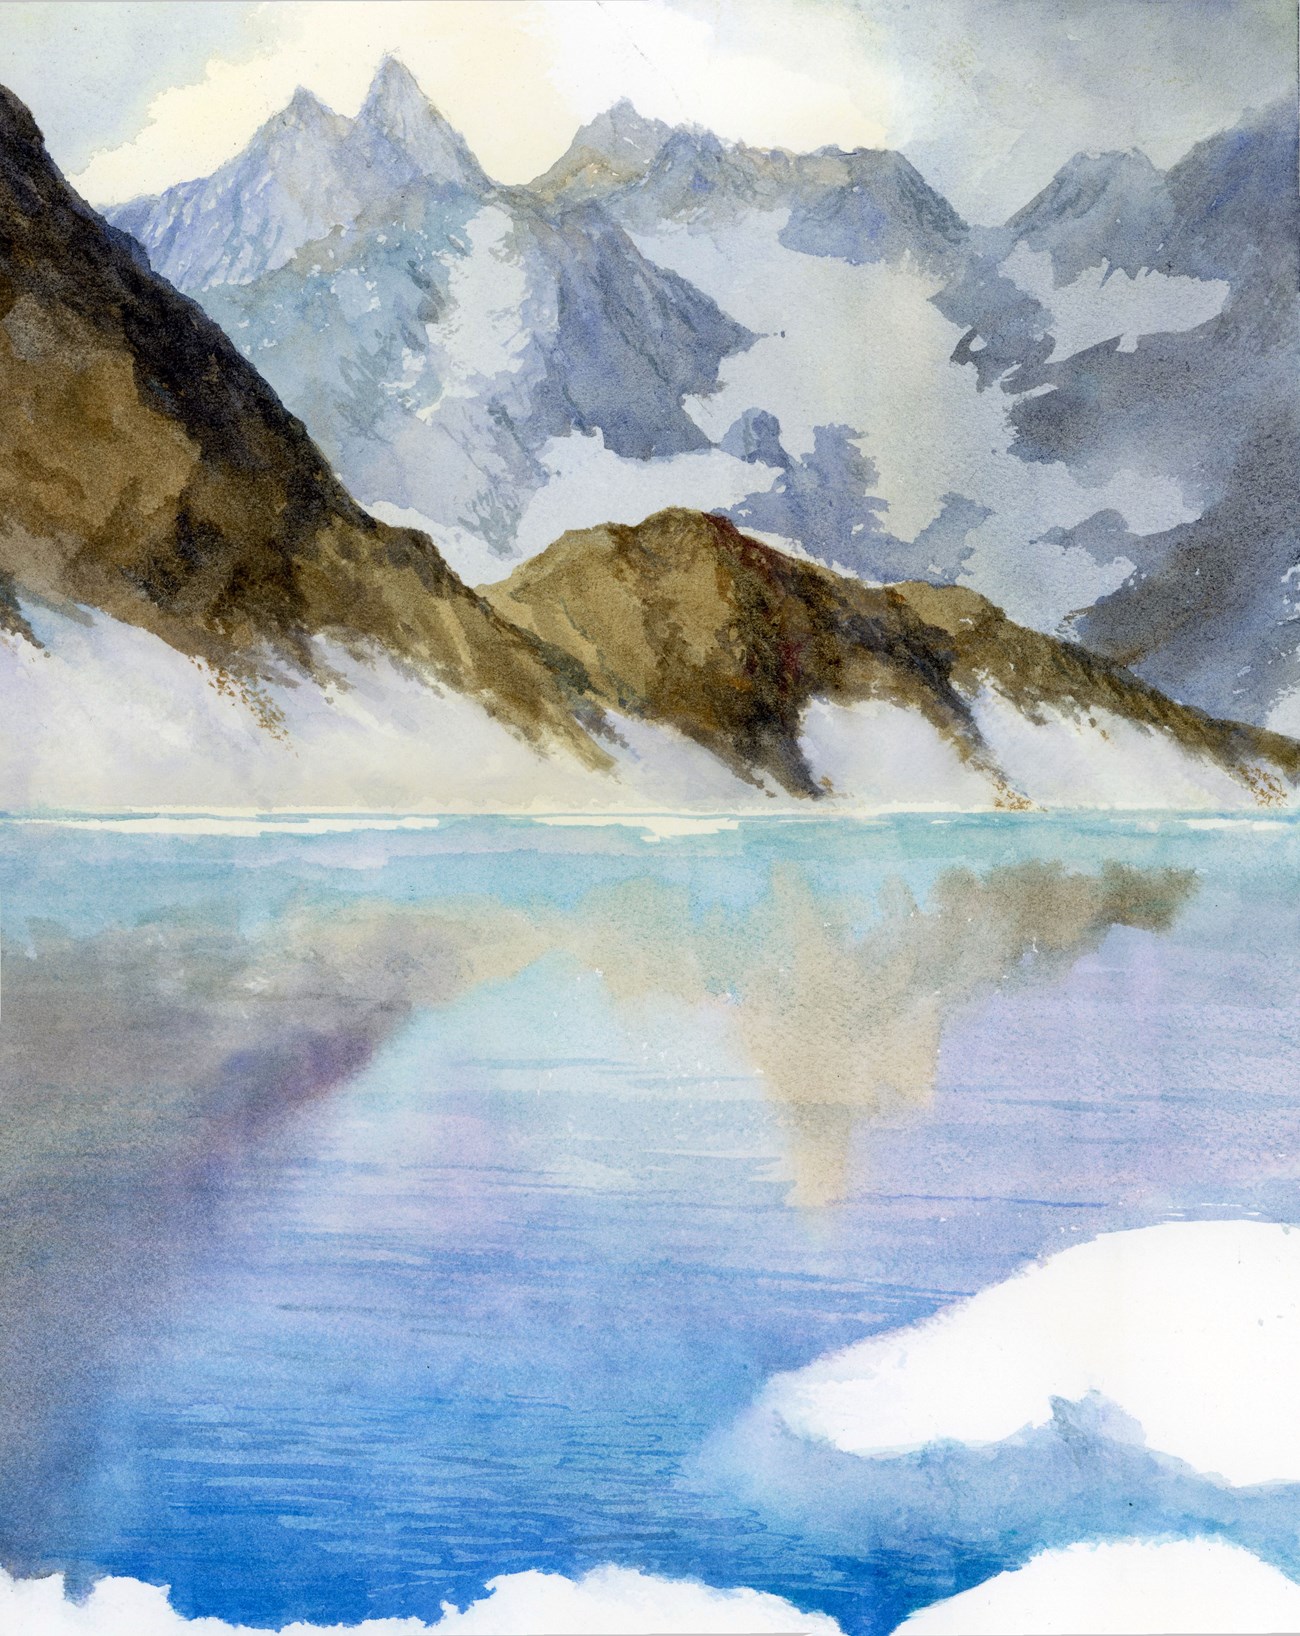 A watercolor painting of a large mountain lake, reflecting snowy peaks.